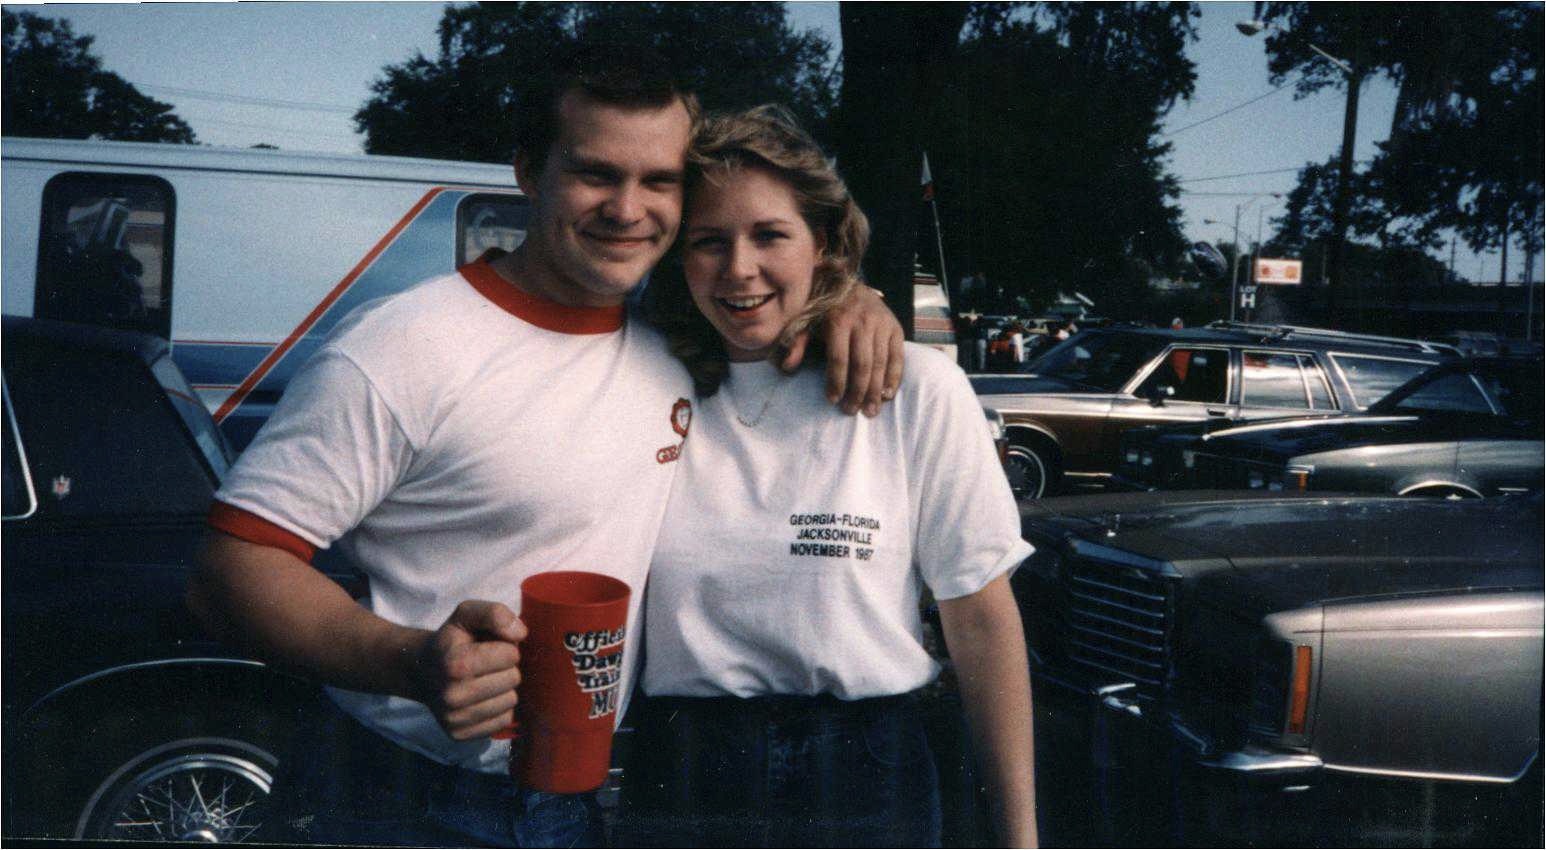 Brent and Kelly in 1987, just before that year’s Georgia-Florida game.